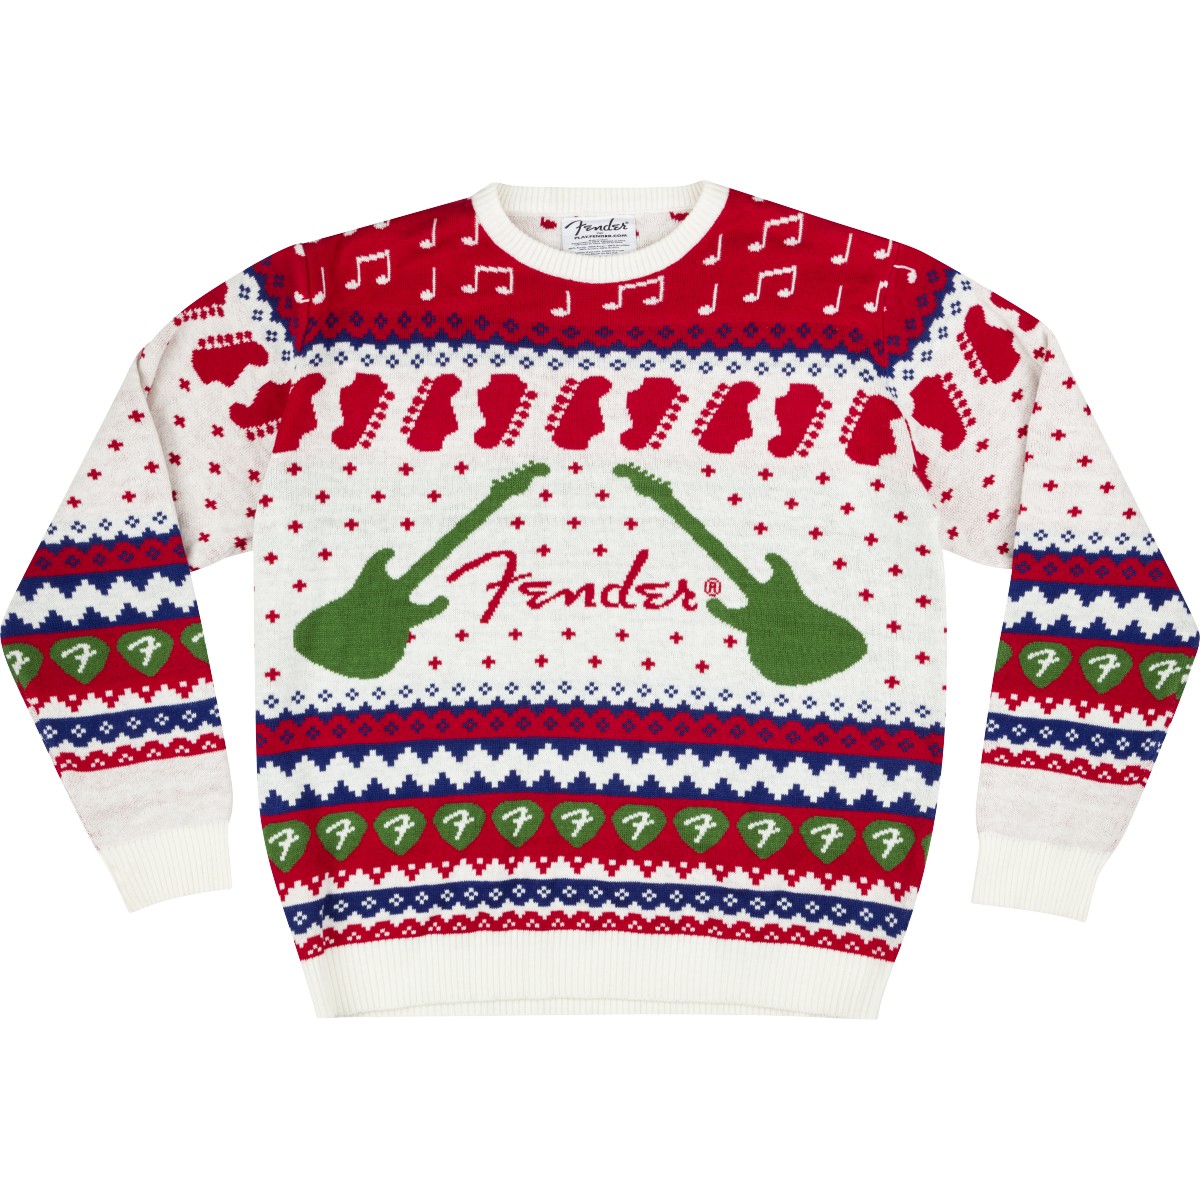 Fender Holiday Sweater 2021, Multi-Color, Small 9190202306